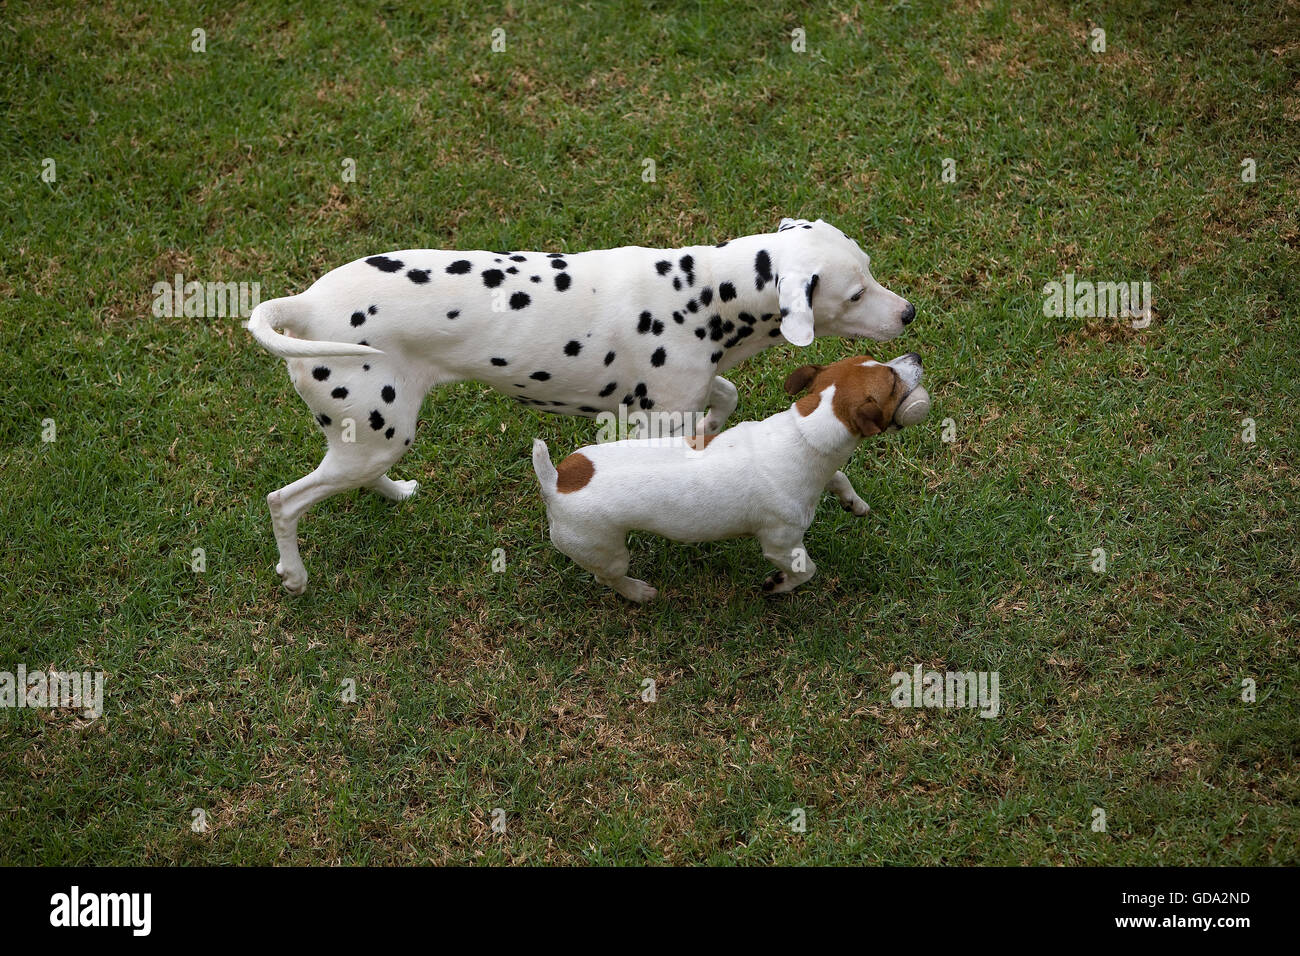 JACK RUSSELL TERRIER AND DALMATIAN PLAYING IN A GARDEN Stock Photo